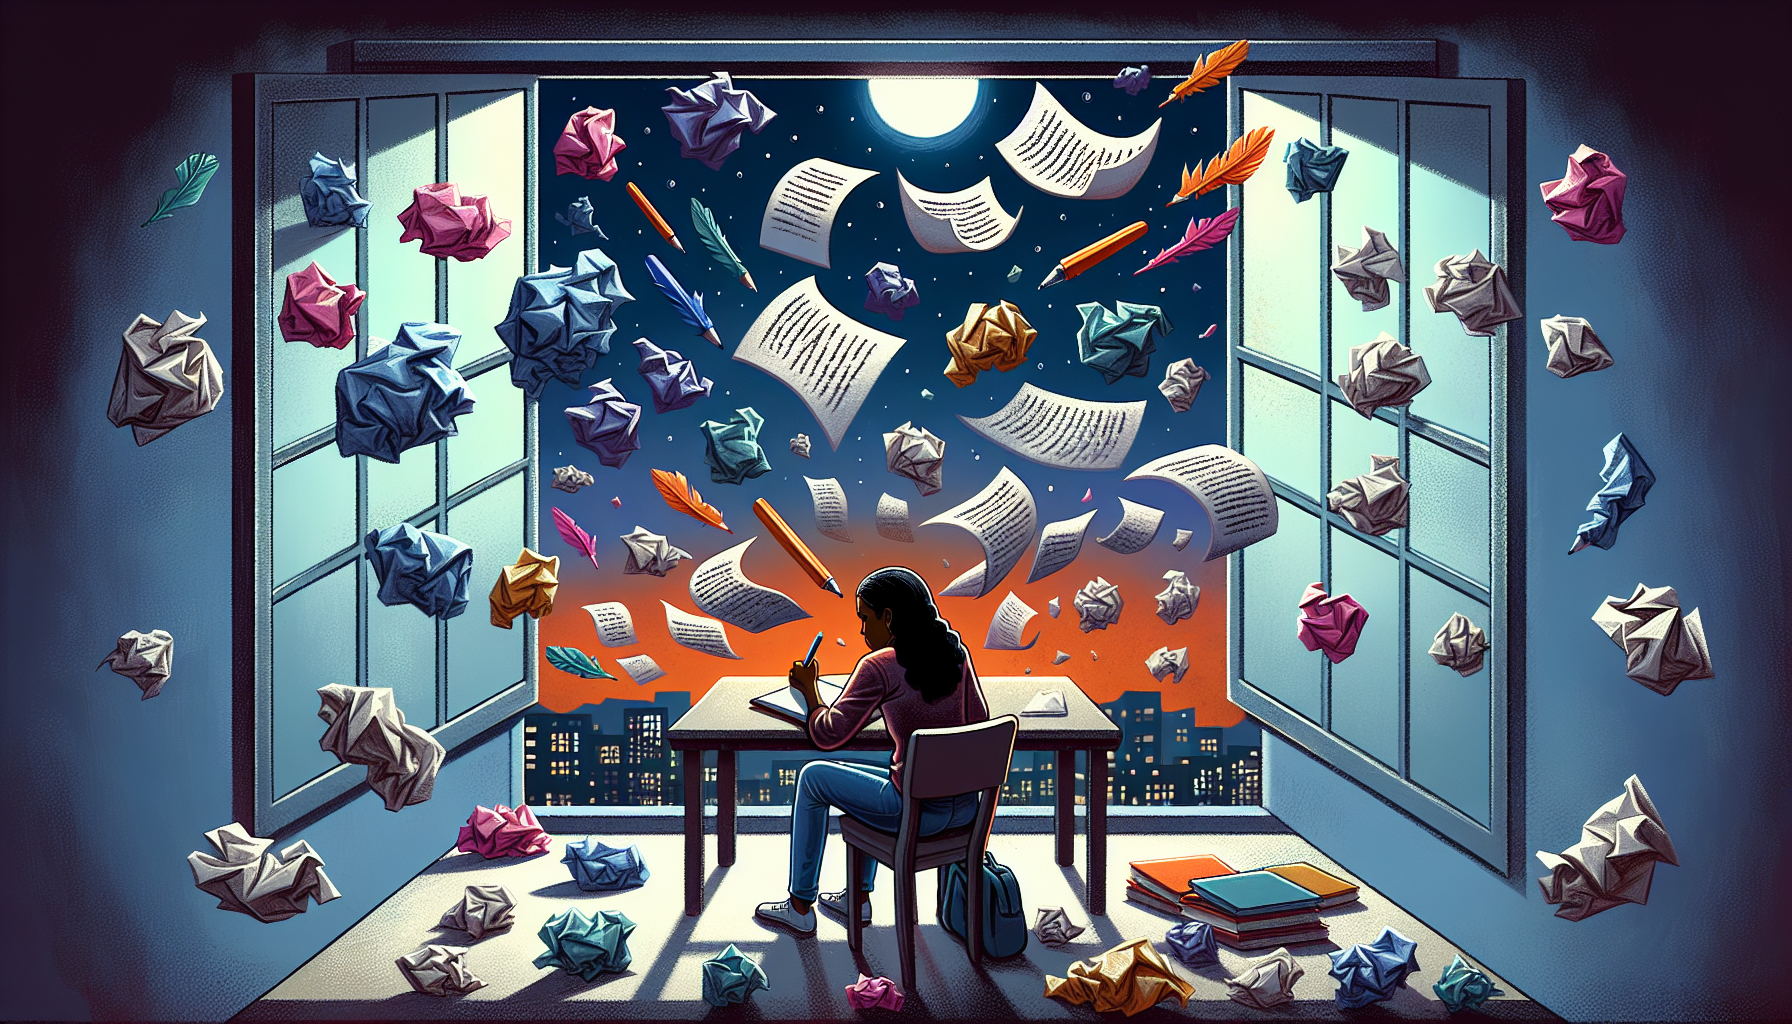 Illustrative depiction of a person overcoming writer's block within a single evening. The scene to be painted in modern style with ample color. The individual, a Black female, sitting indoors near a window showing the evening scenery, laden with a crumpled page in one hand and a pen in the other. Surrounding her, hovers chunks of torn paper symbolizing discarded ideas. Gradually, the pieces of paper smooth out, messages on them clear up, their colors brighten, eventually merging into a vibrant stream of words flowing into an open notebook on her desk.